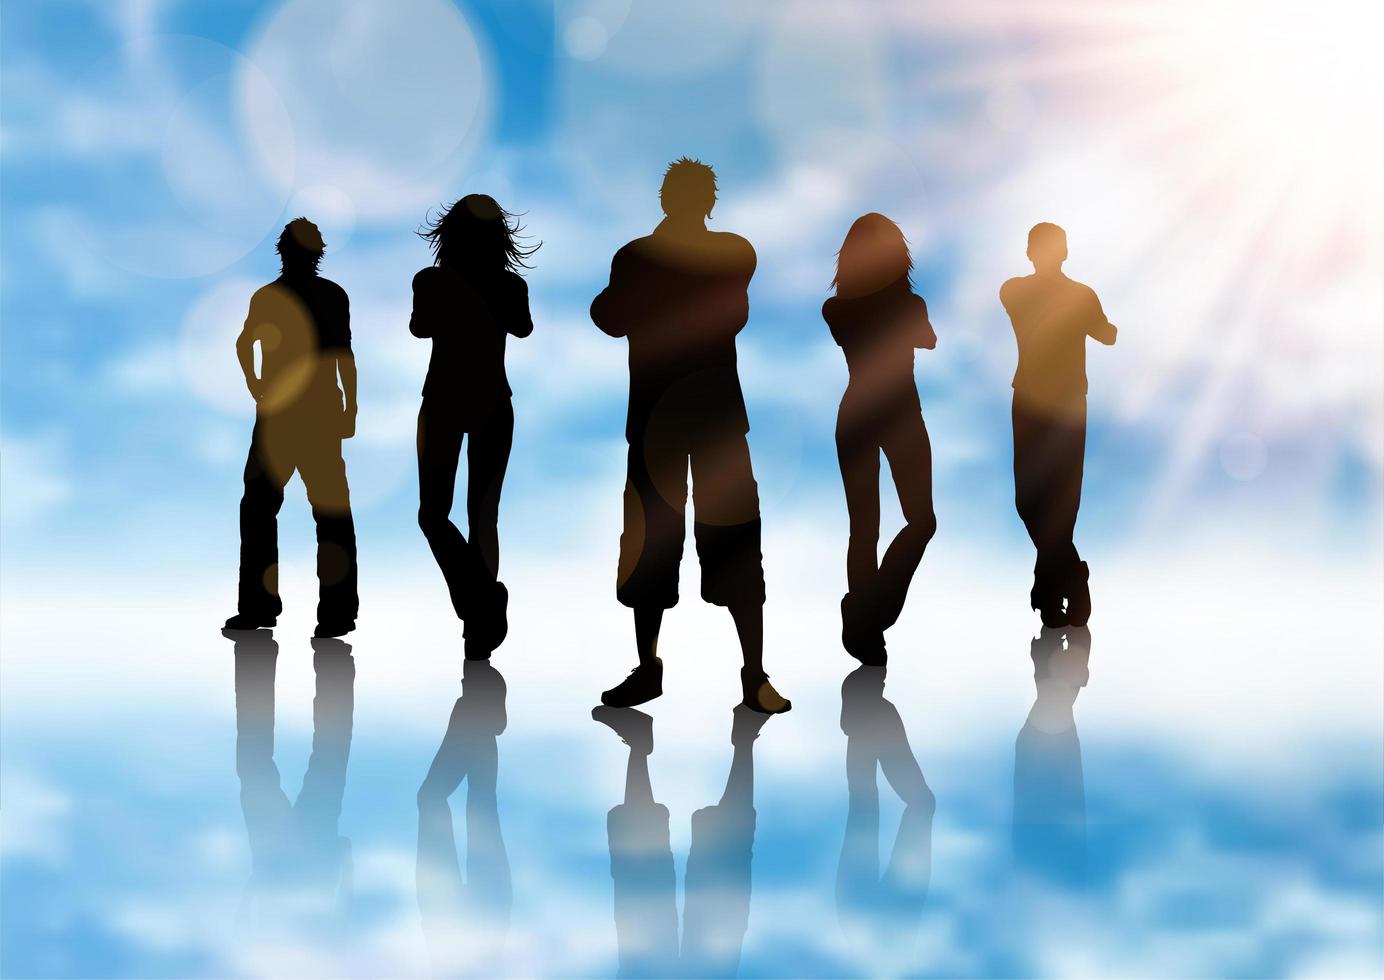 Silhouette of a group of people vector